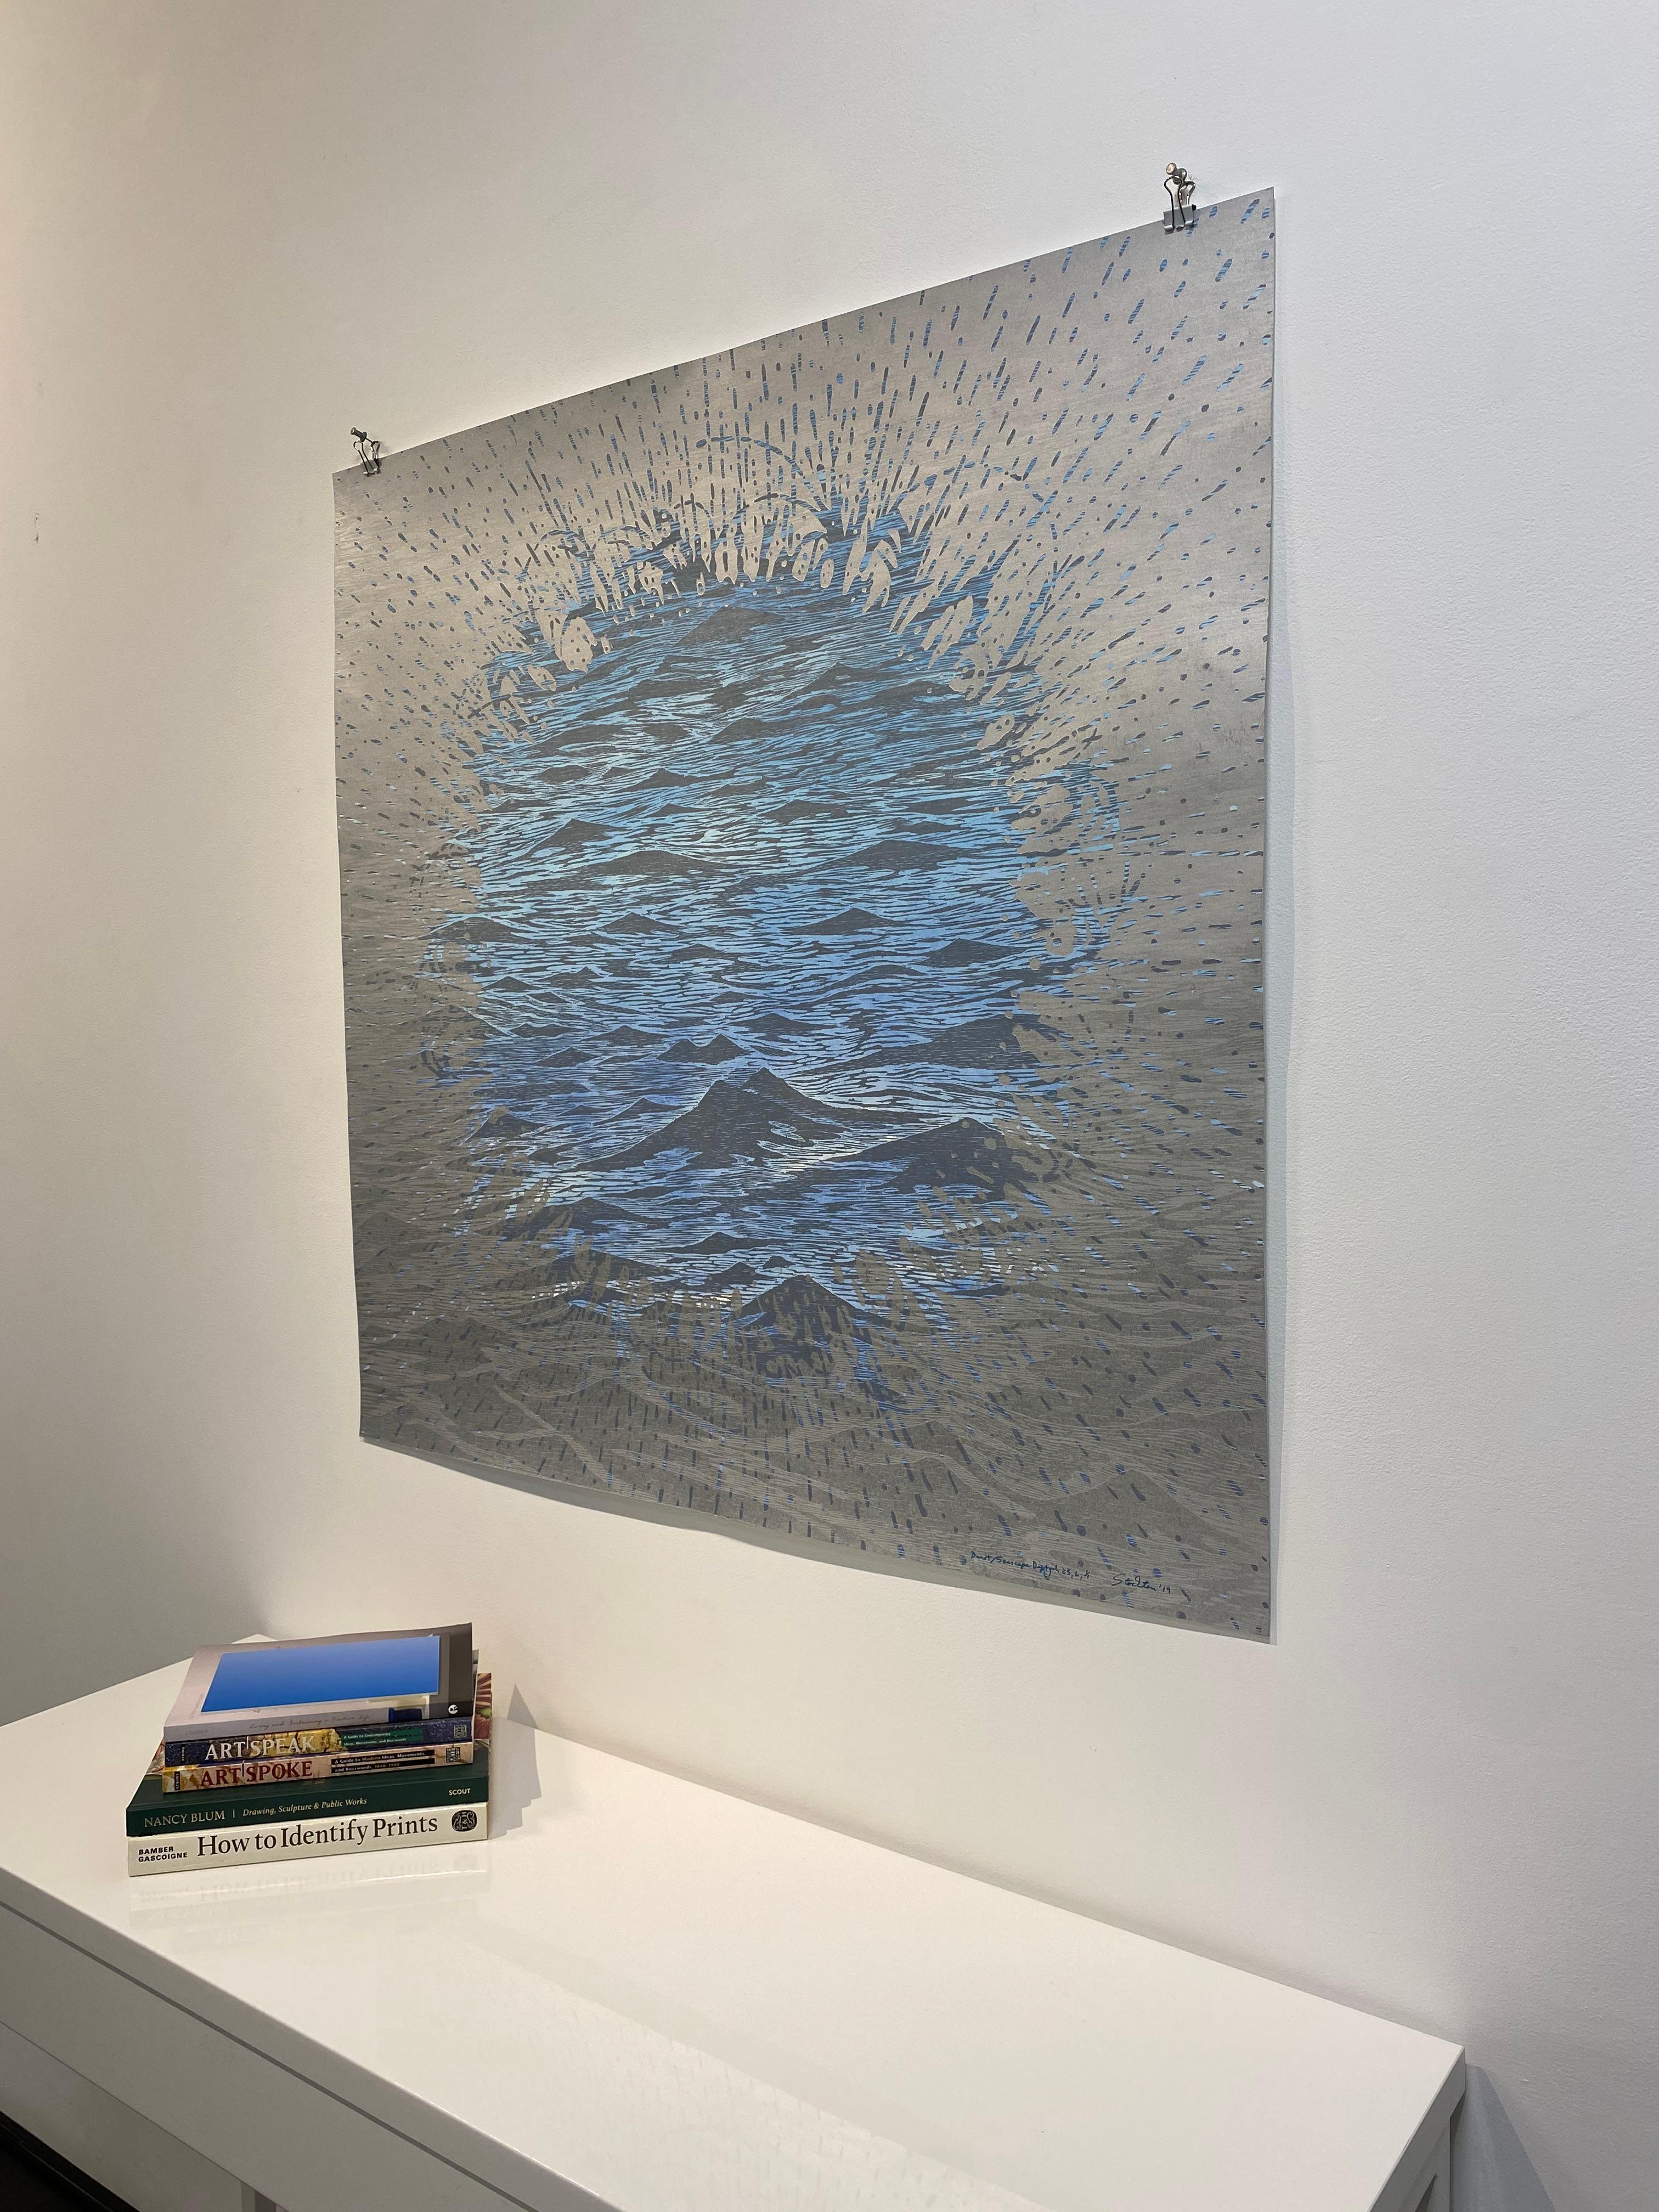 This horizontal diptych of two woodcut prints on paper evokes the peacefulness of ocean waves in alternating shades of blue and silver in metallic and colored inks with watercolor on paper. A central burst shape is the focal point of either side,